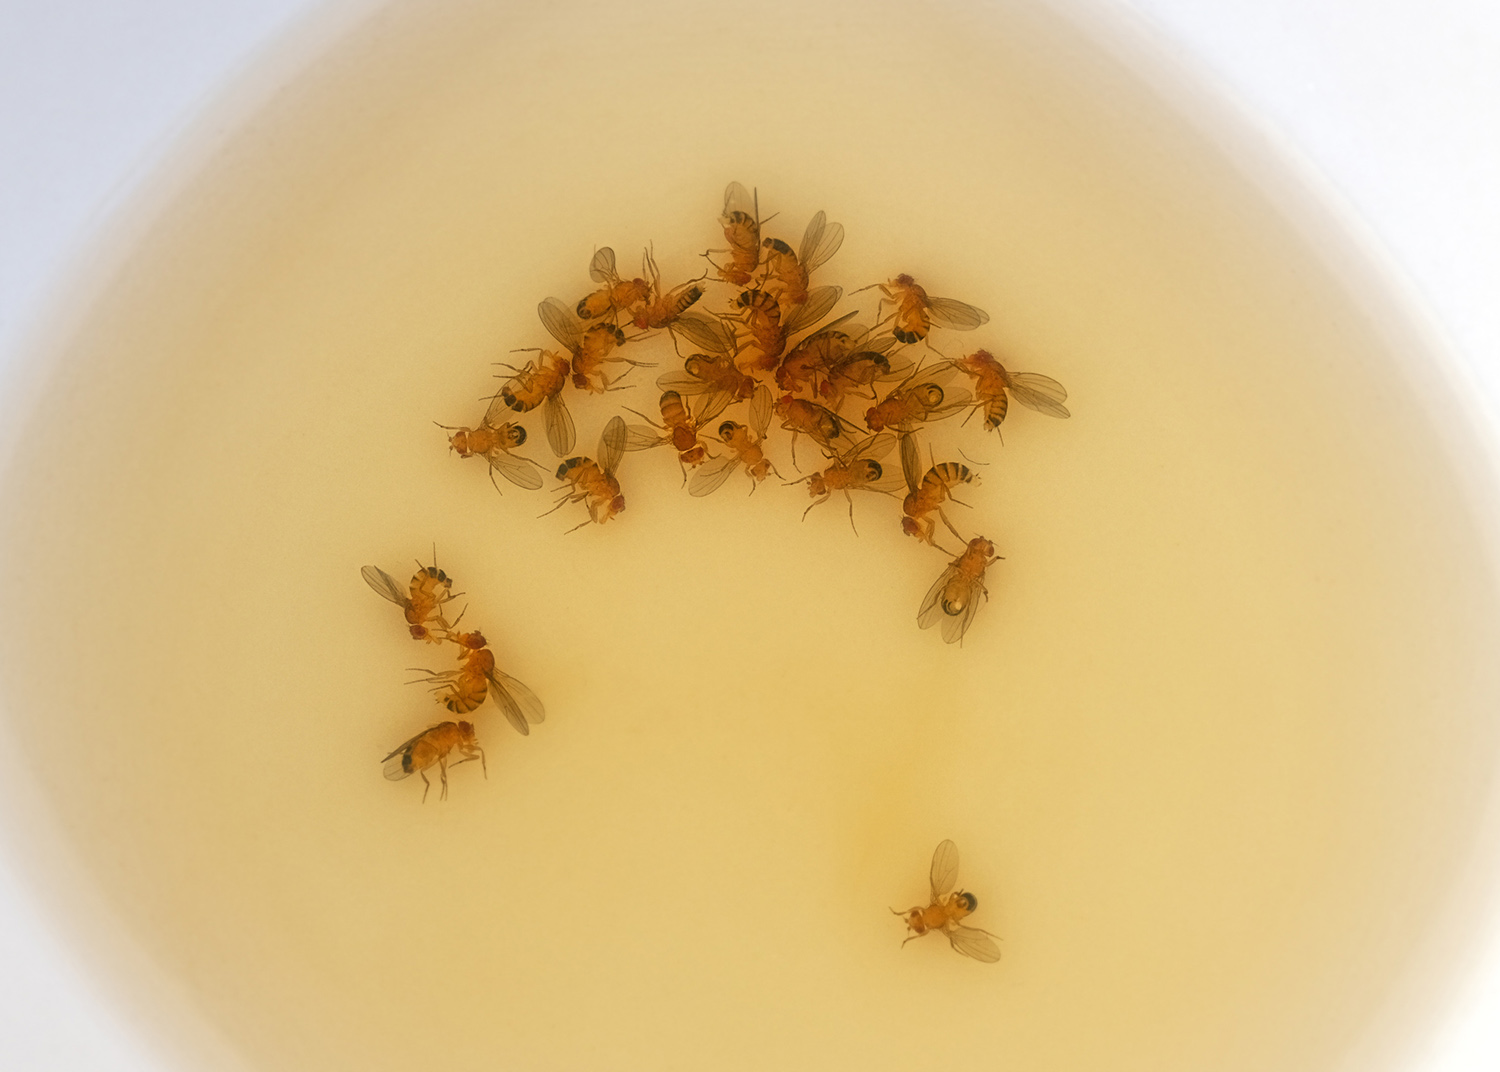 View from above on dead fruit flies in a small white ceramic bowl